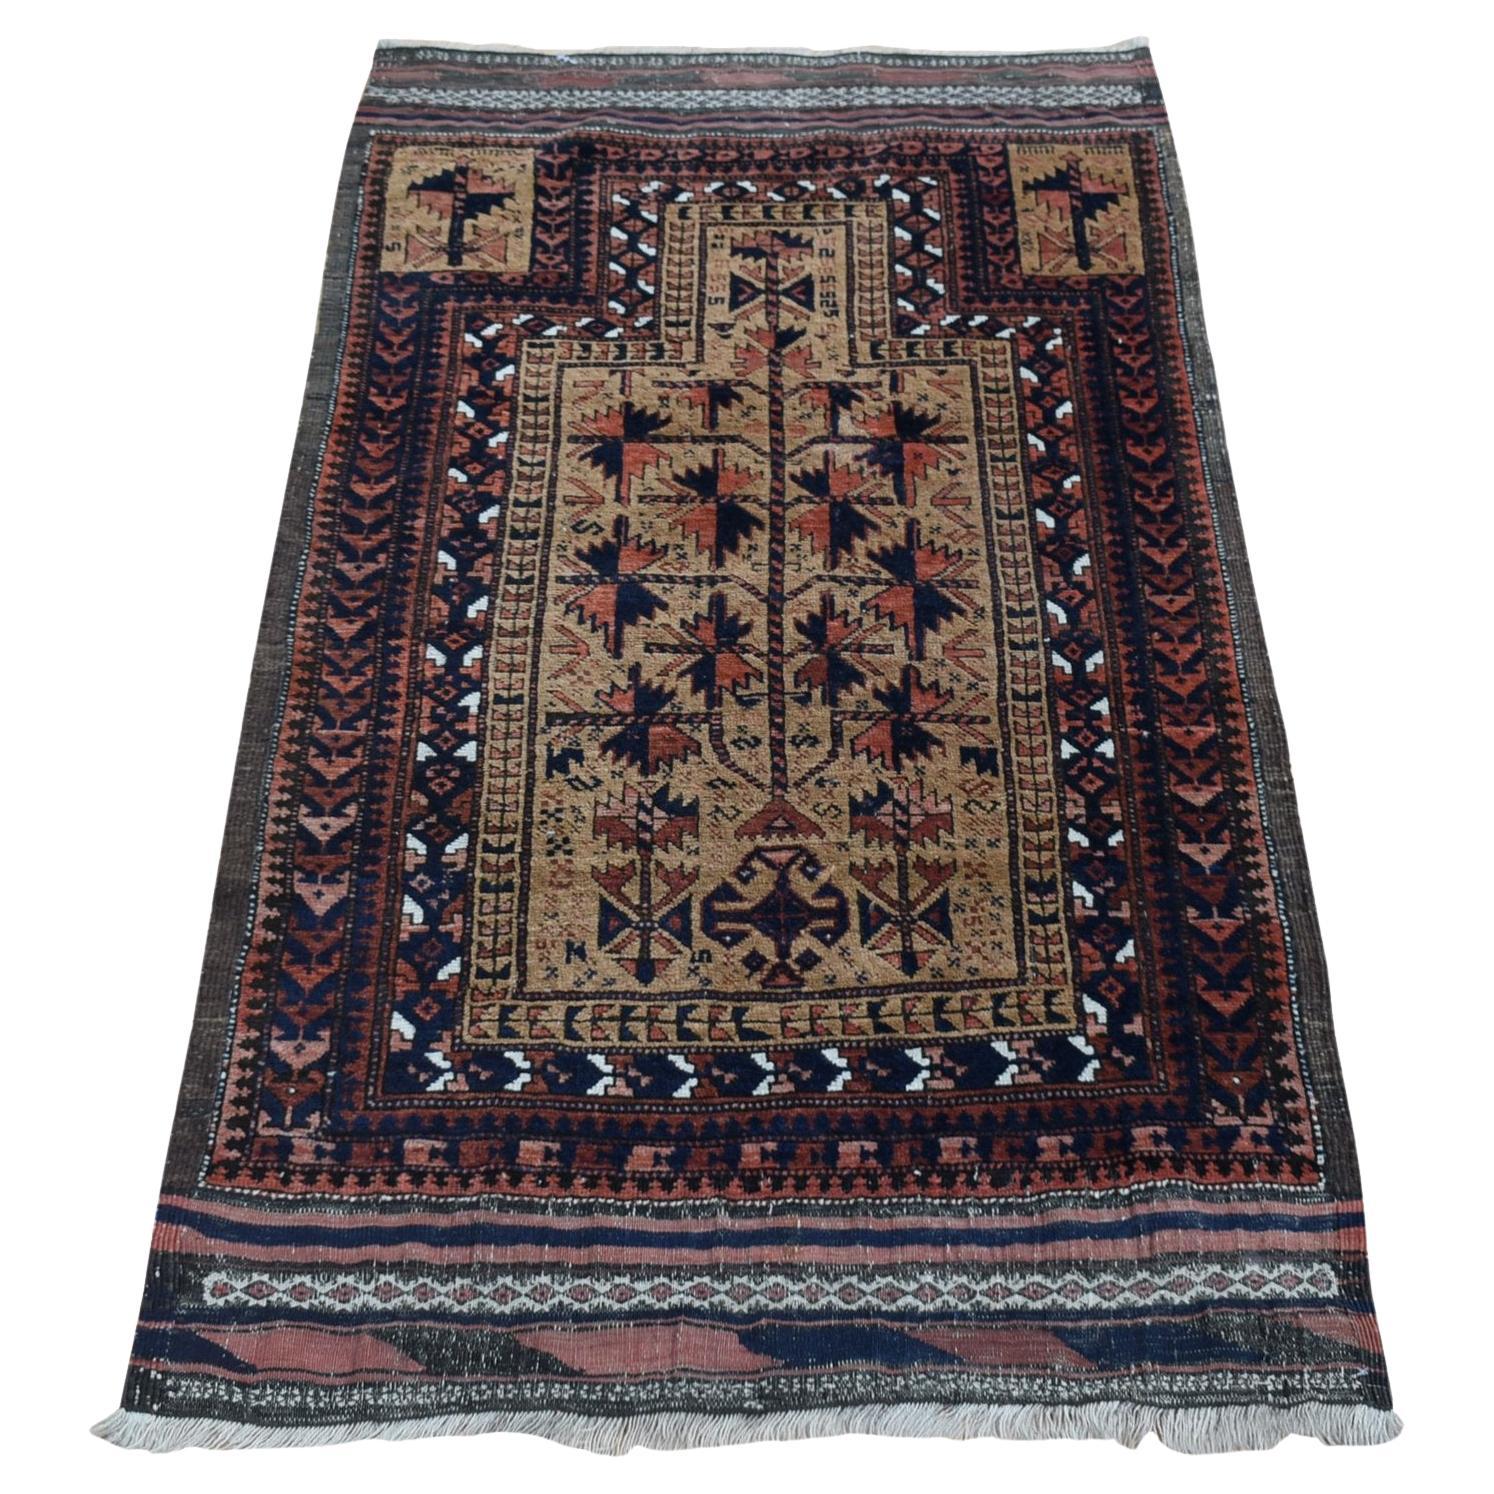 Camel Hair, Antique Persian Baluch with Prayer Design, Wool Hand Knotted Rug